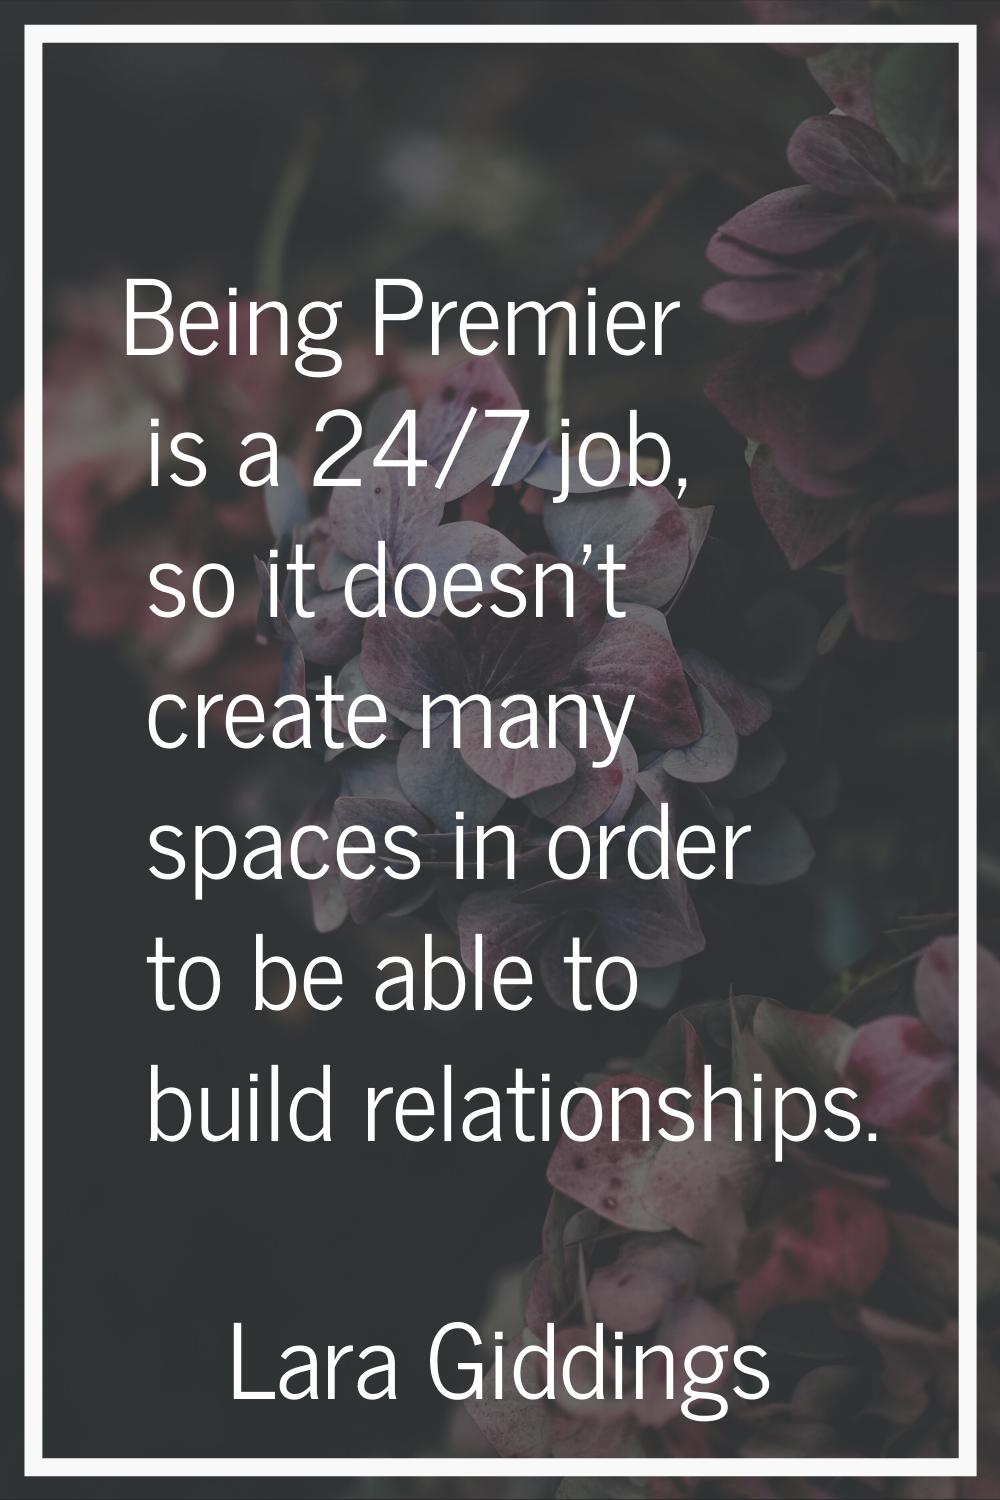 Being Premier is a 24/7 job, so it doesn't create many spaces in order to be able to build relation